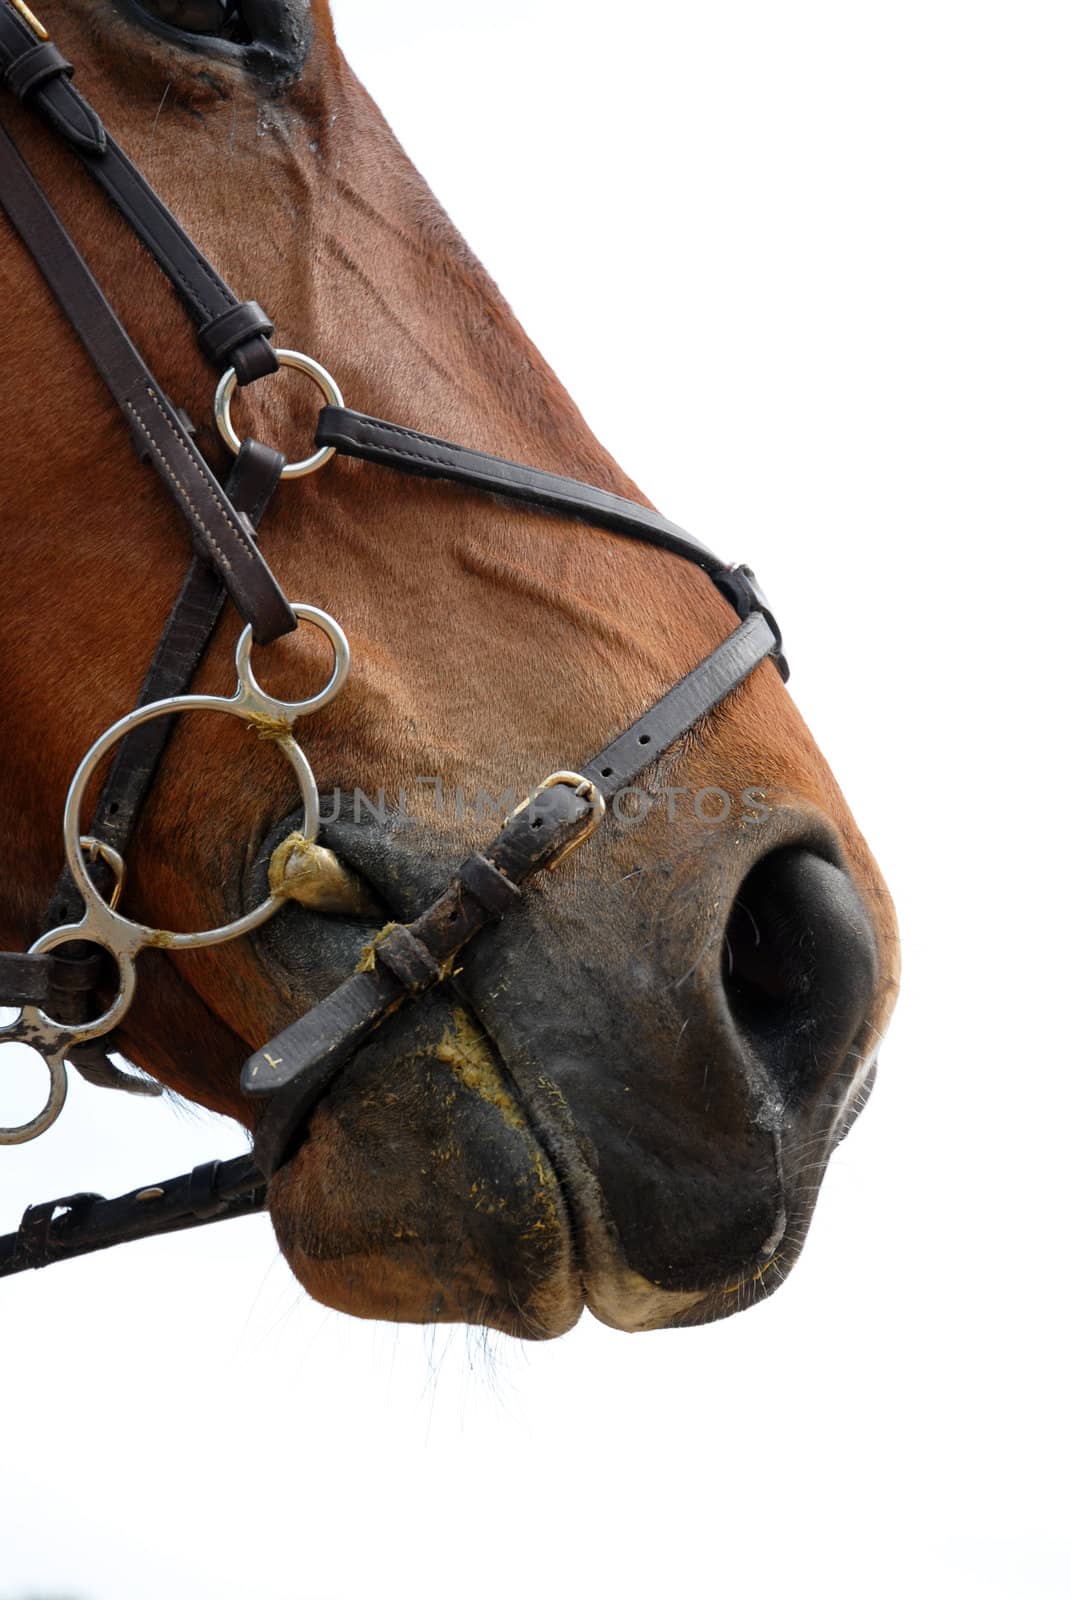 a close up of horse mouth on a white background